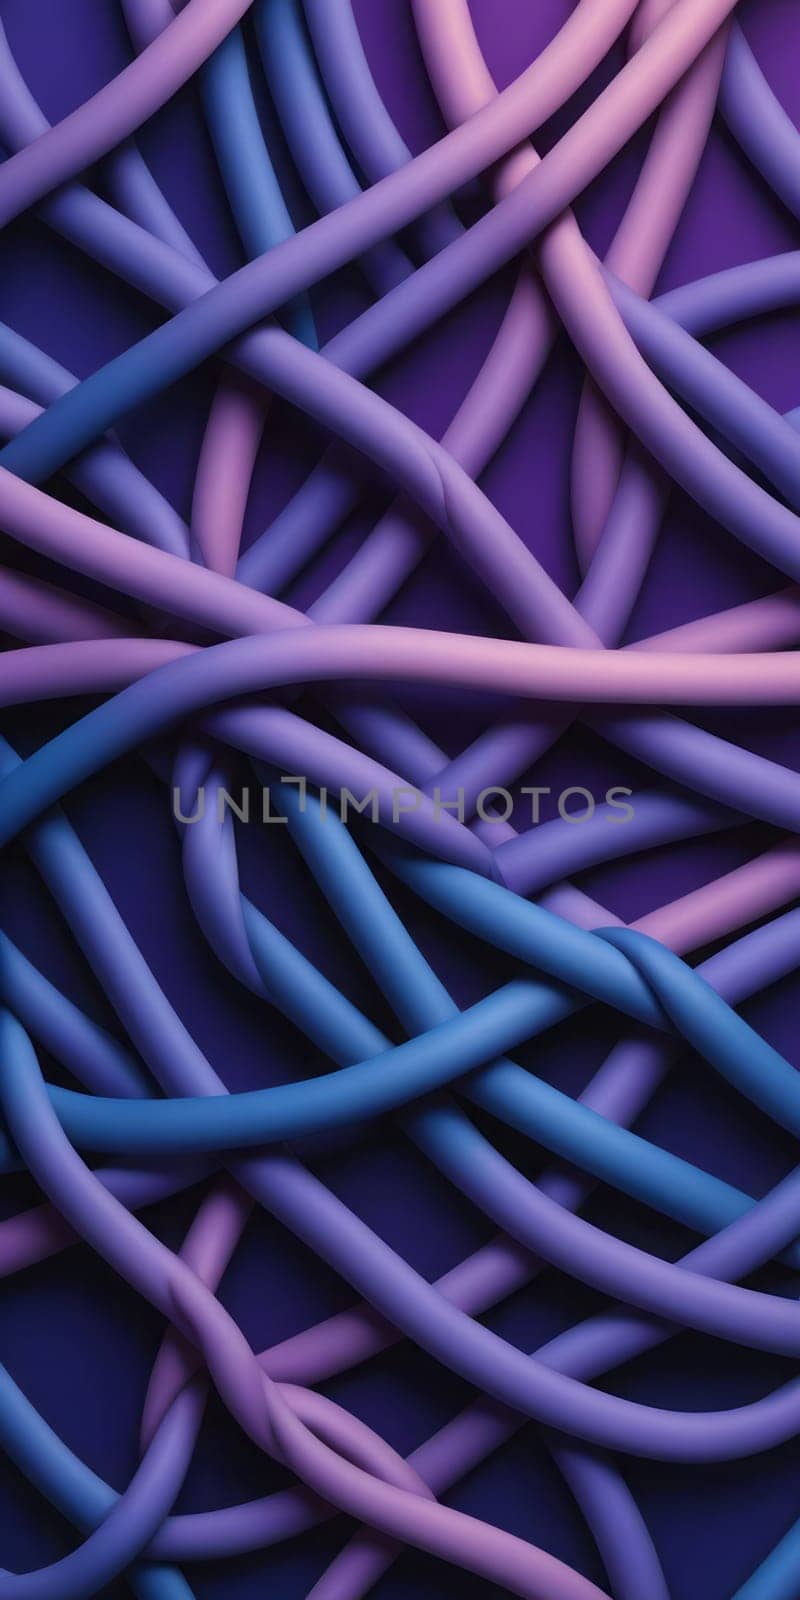 Knotted Shapes in Purple and Navy by nkotlyar